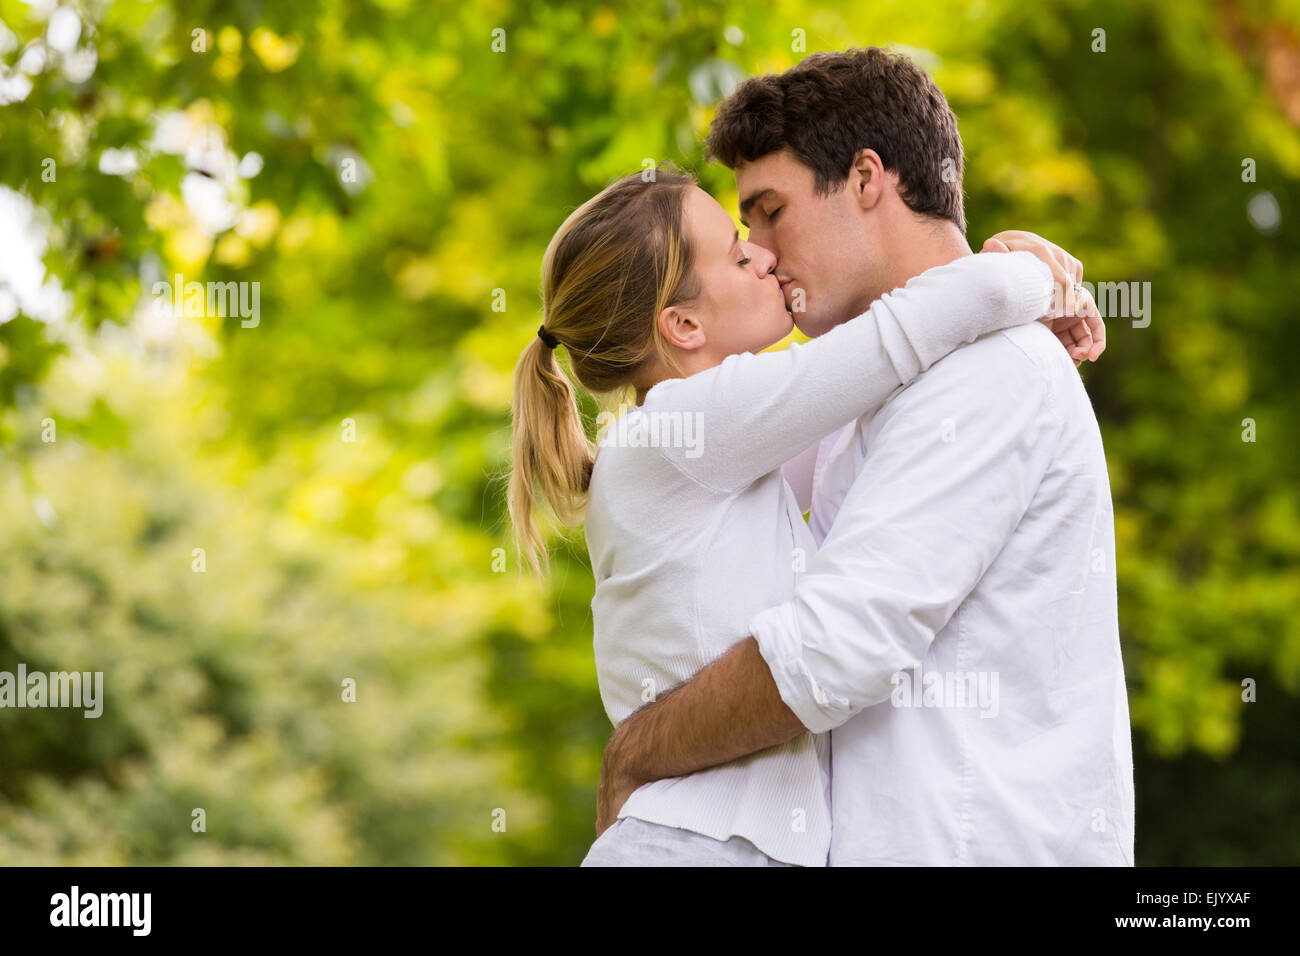 loving young couple kissing outdoors Stock Photo